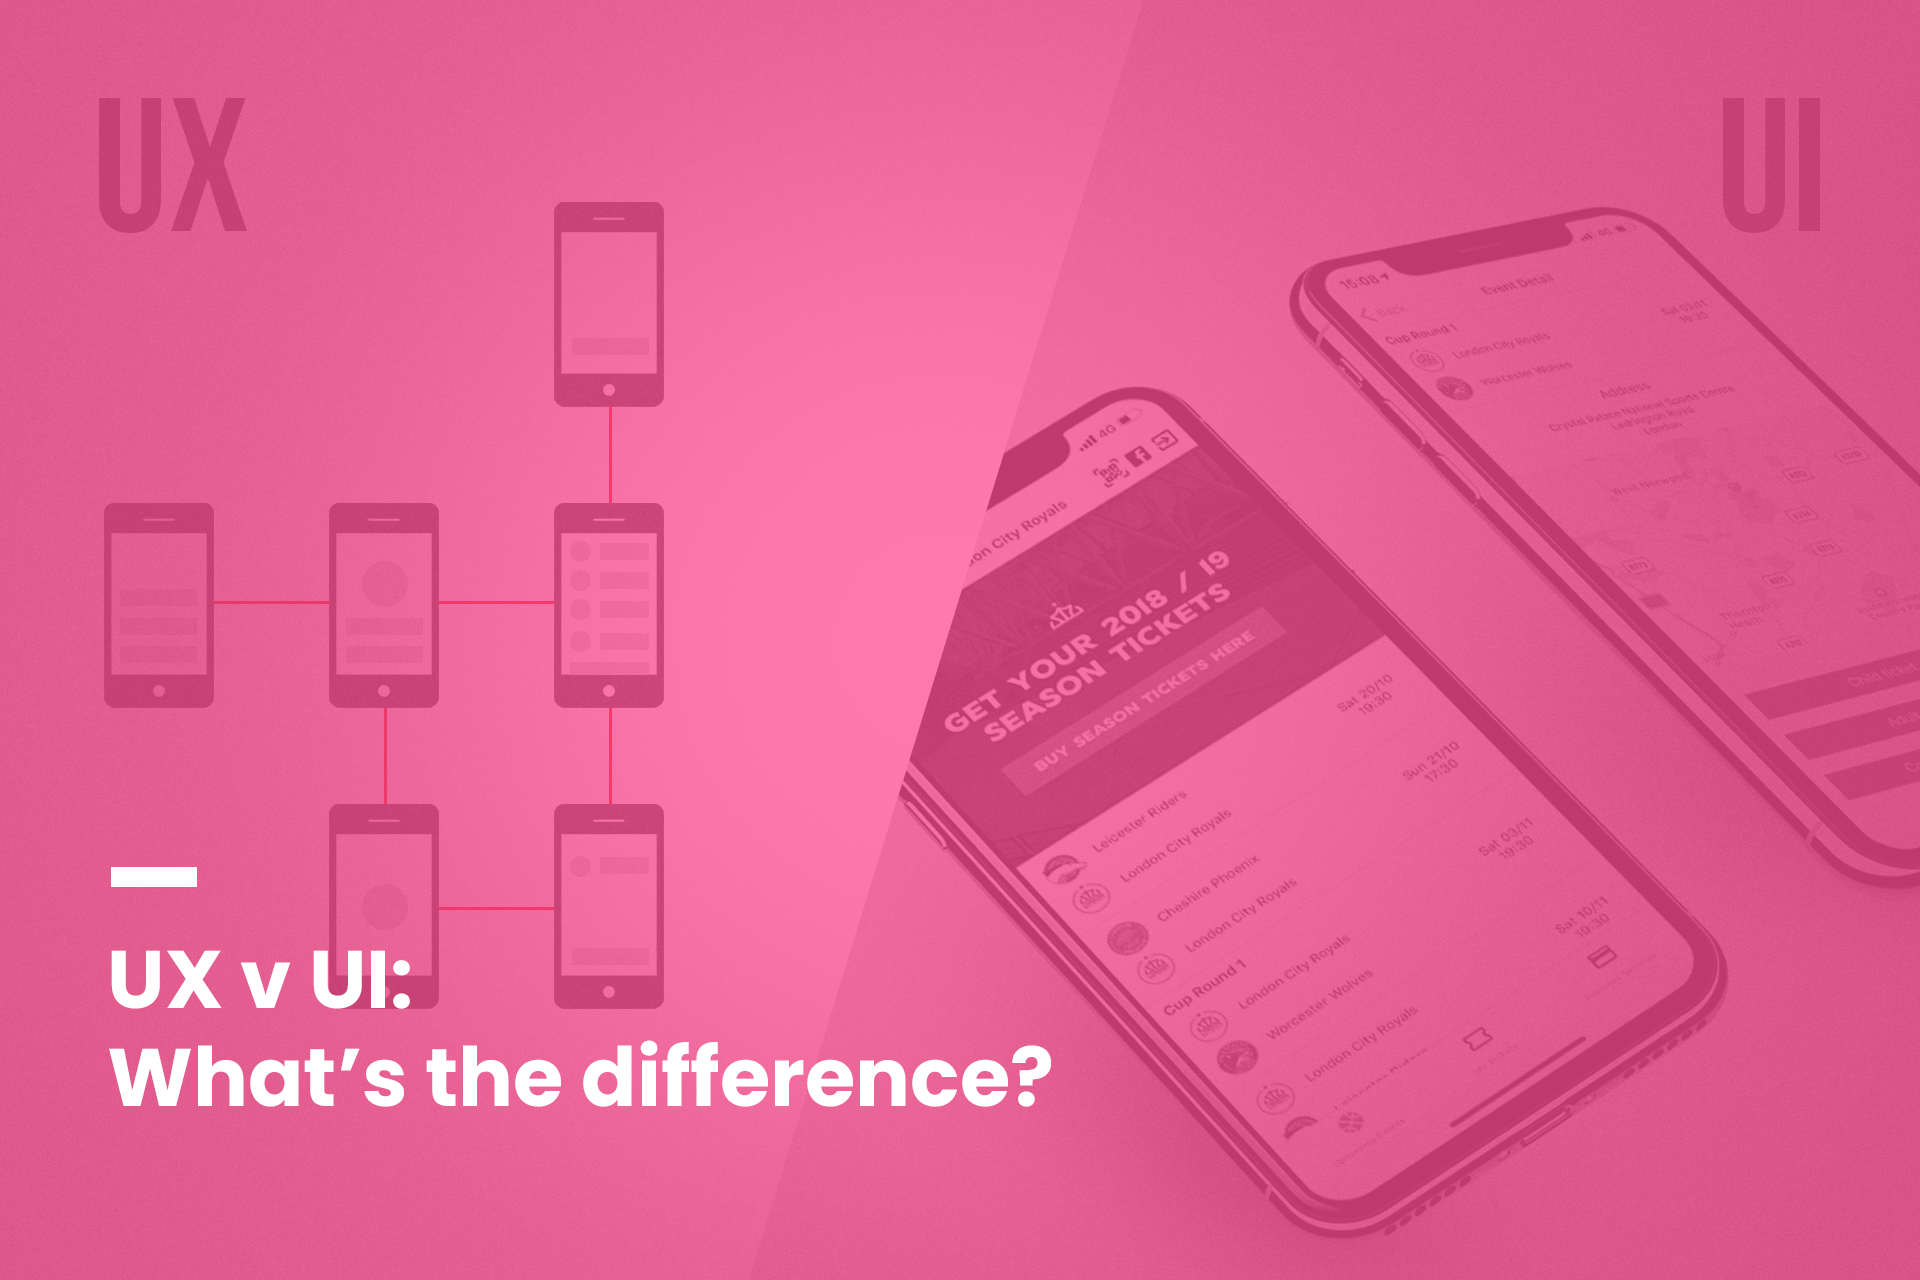 UX v UI: What's the difference?